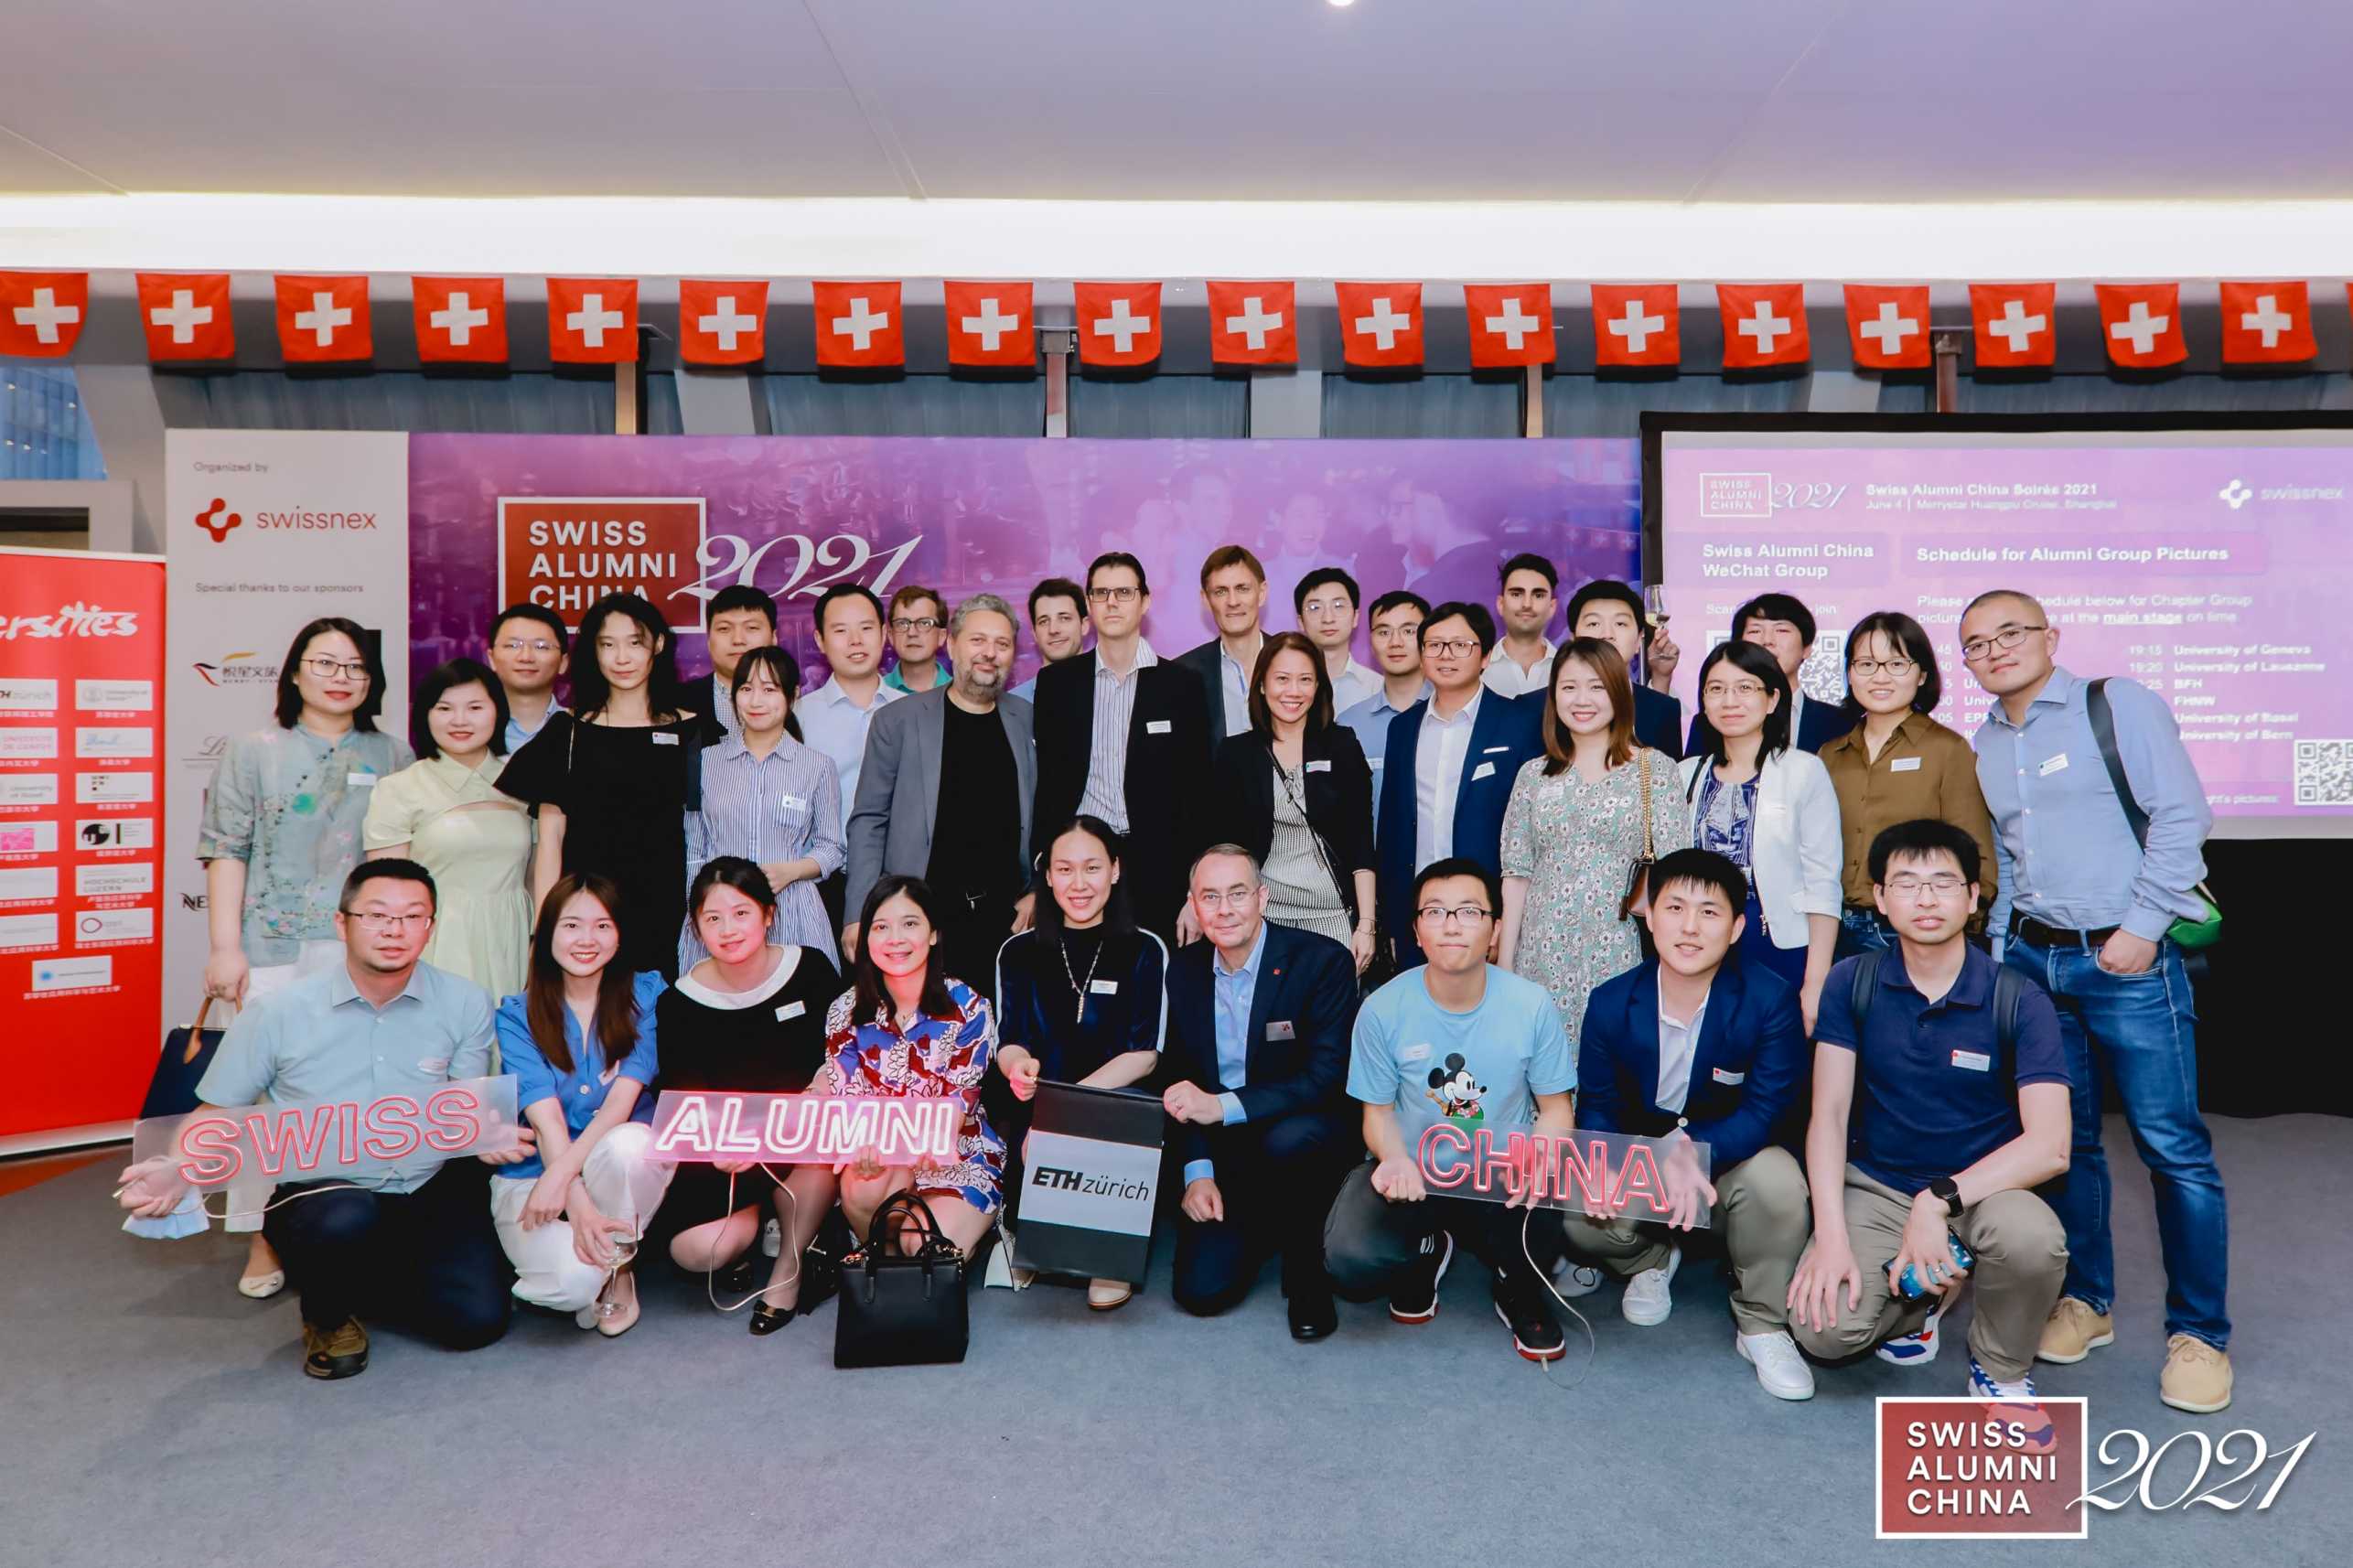 Enlarged view: ETH Alumni Shanghai Group Picture on Swiss Alumni China 2021